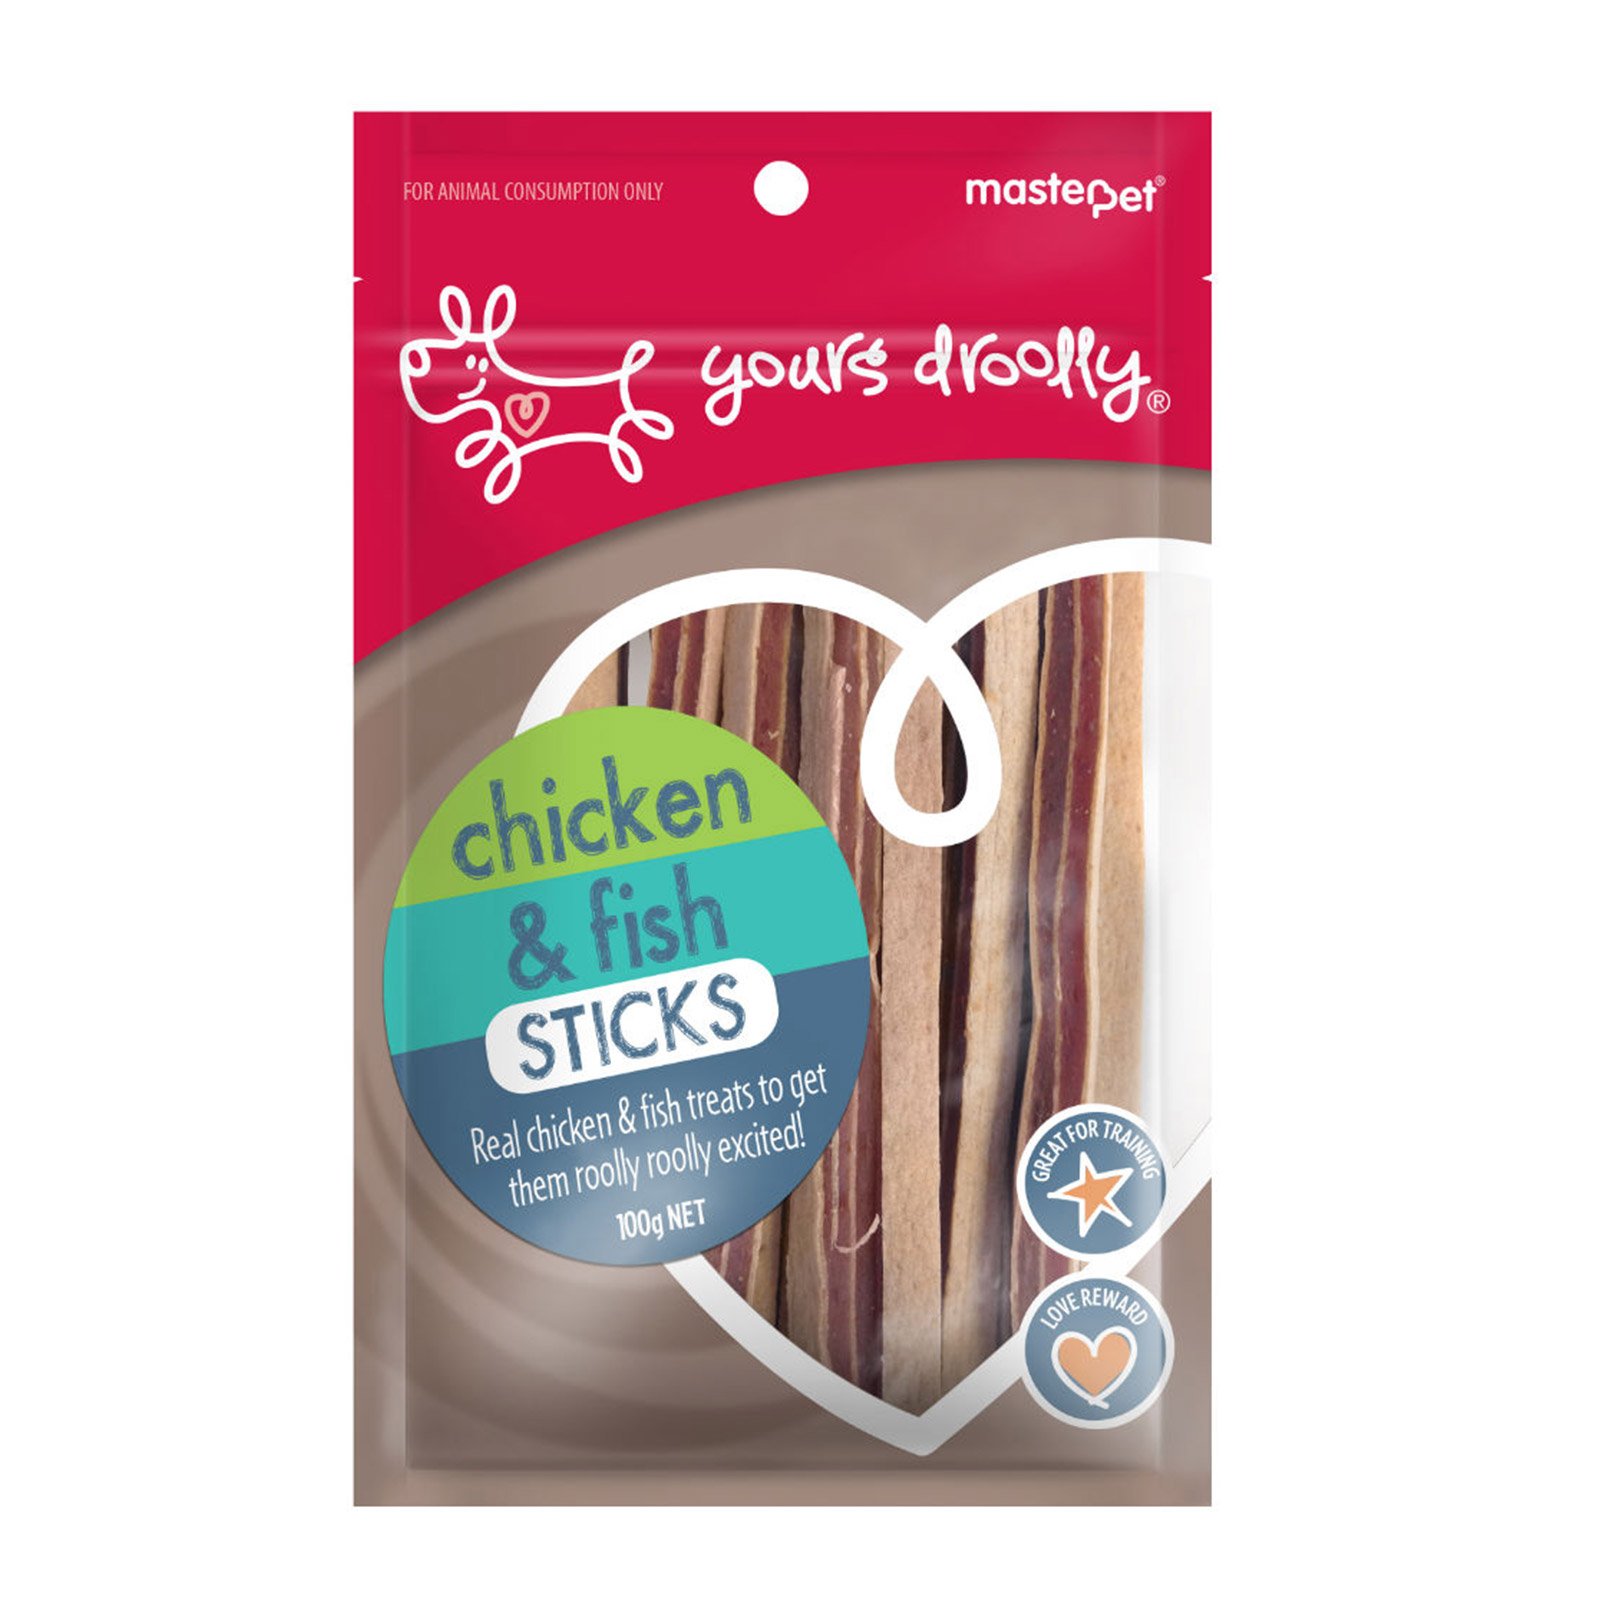 Yours Droolly Chicken and Fish Sticks Dog Treats